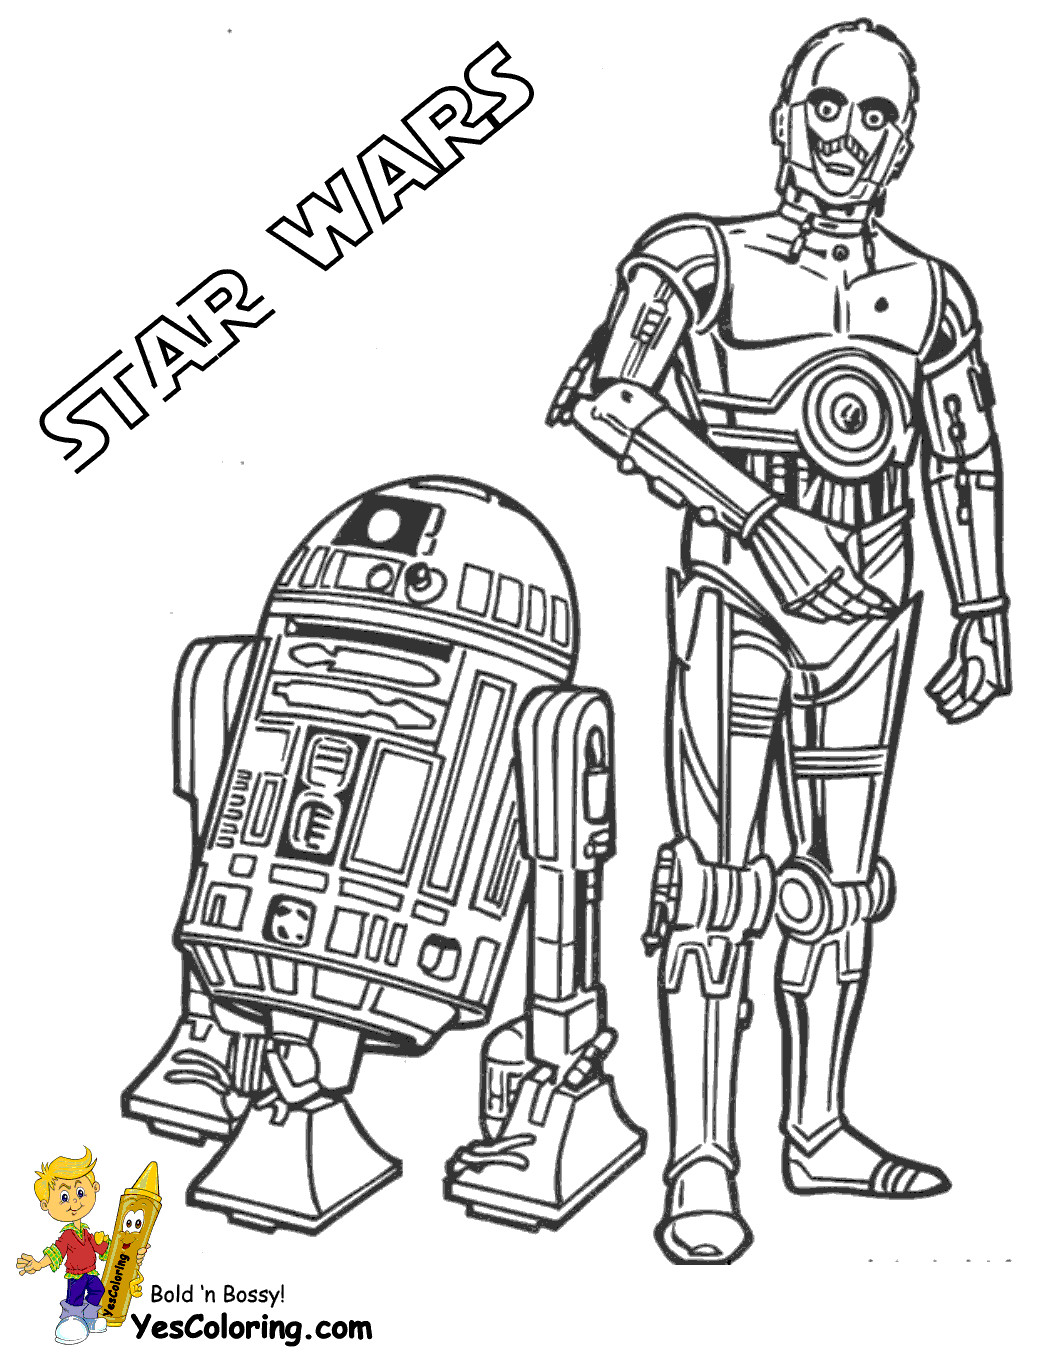 Coloring Pages For Kids Star Wars
 Very popular images Star Wars coloring pages on